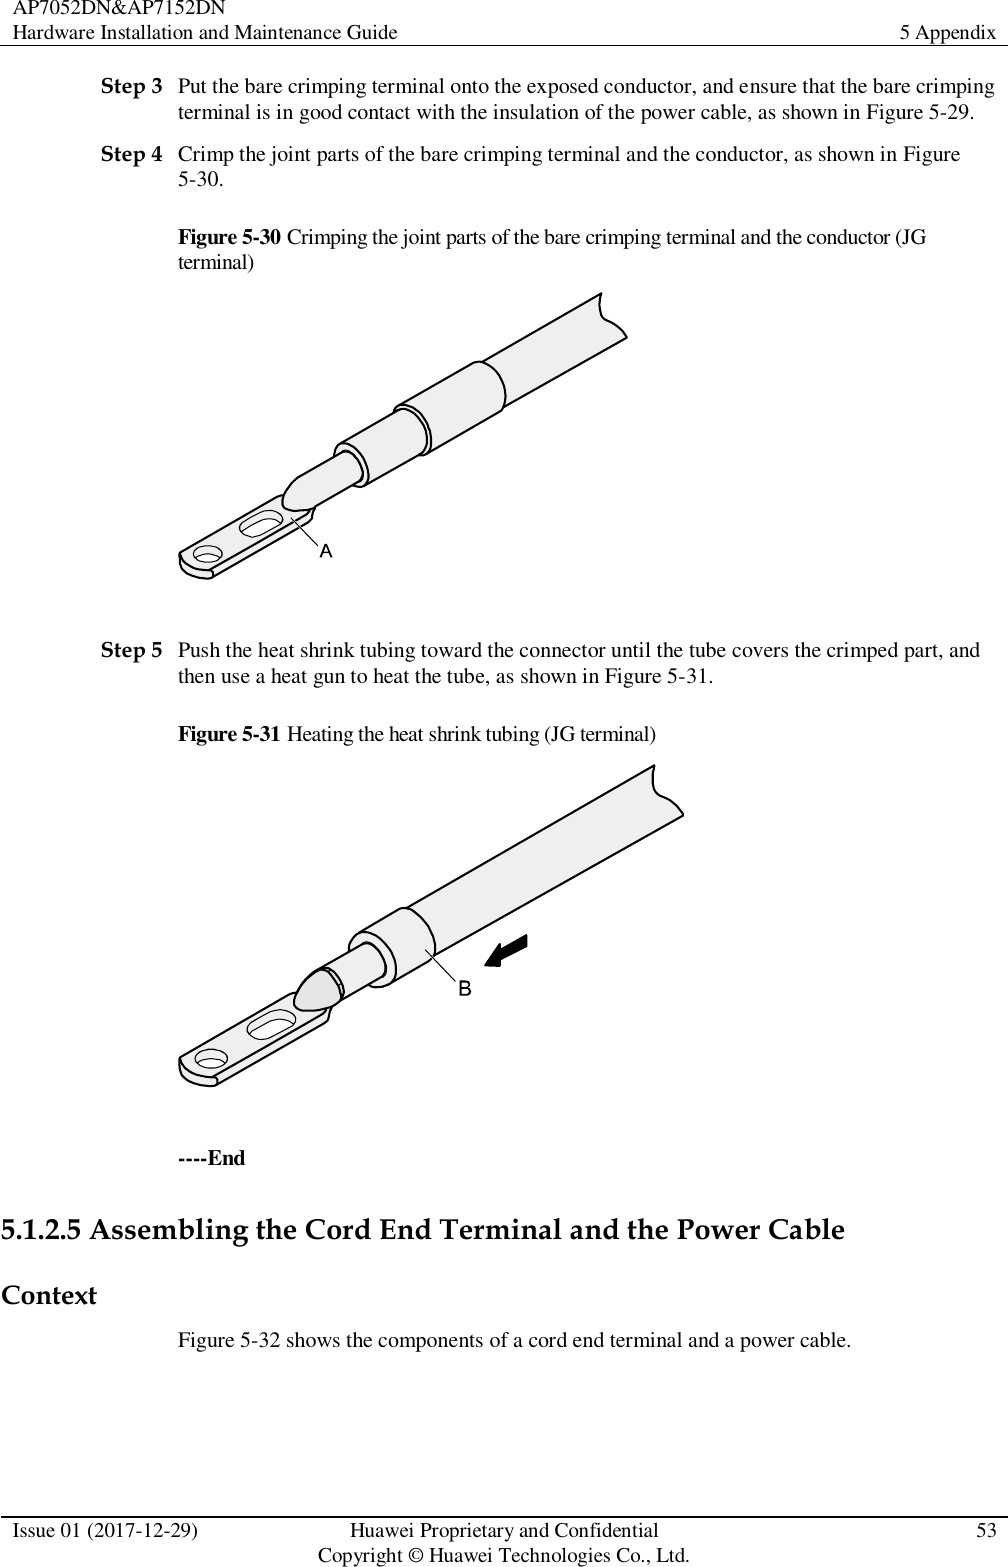 AP7052DN&amp;AP7152DN Hardware Installation and Maintenance Guide 5 Appendix  Issue 01 (2017-12-29) Huawei Proprietary and Confidential                                     Copyright © Huawei Technologies Co., Ltd. 53  Step 3 Put the bare crimping terminal onto the exposed conductor, and ensure that the bare crimping terminal is in good contact with the insulation of the power cable, as shown in Figure 5-29. Step 4 Crimp the joint parts of the bare crimping terminal and the conductor, as shown in Figure 5-30. Figure 5-30 Crimping the joint parts of the bare crimping terminal and the conductor (JG terminal)   Step 5 Push the heat shrink tubing toward the connector until the tube covers the crimped part, and then use a heat gun to heat the tube, as shown in Figure 5-31. Figure 5-31 Heating the heat shrink tubing (JG terminal)   ----End 5.1.2.5 Assembling the Cord End Terminal and the Power Cable Context Figure 5-32 shows the components of a cord end terminal and a power cable. 